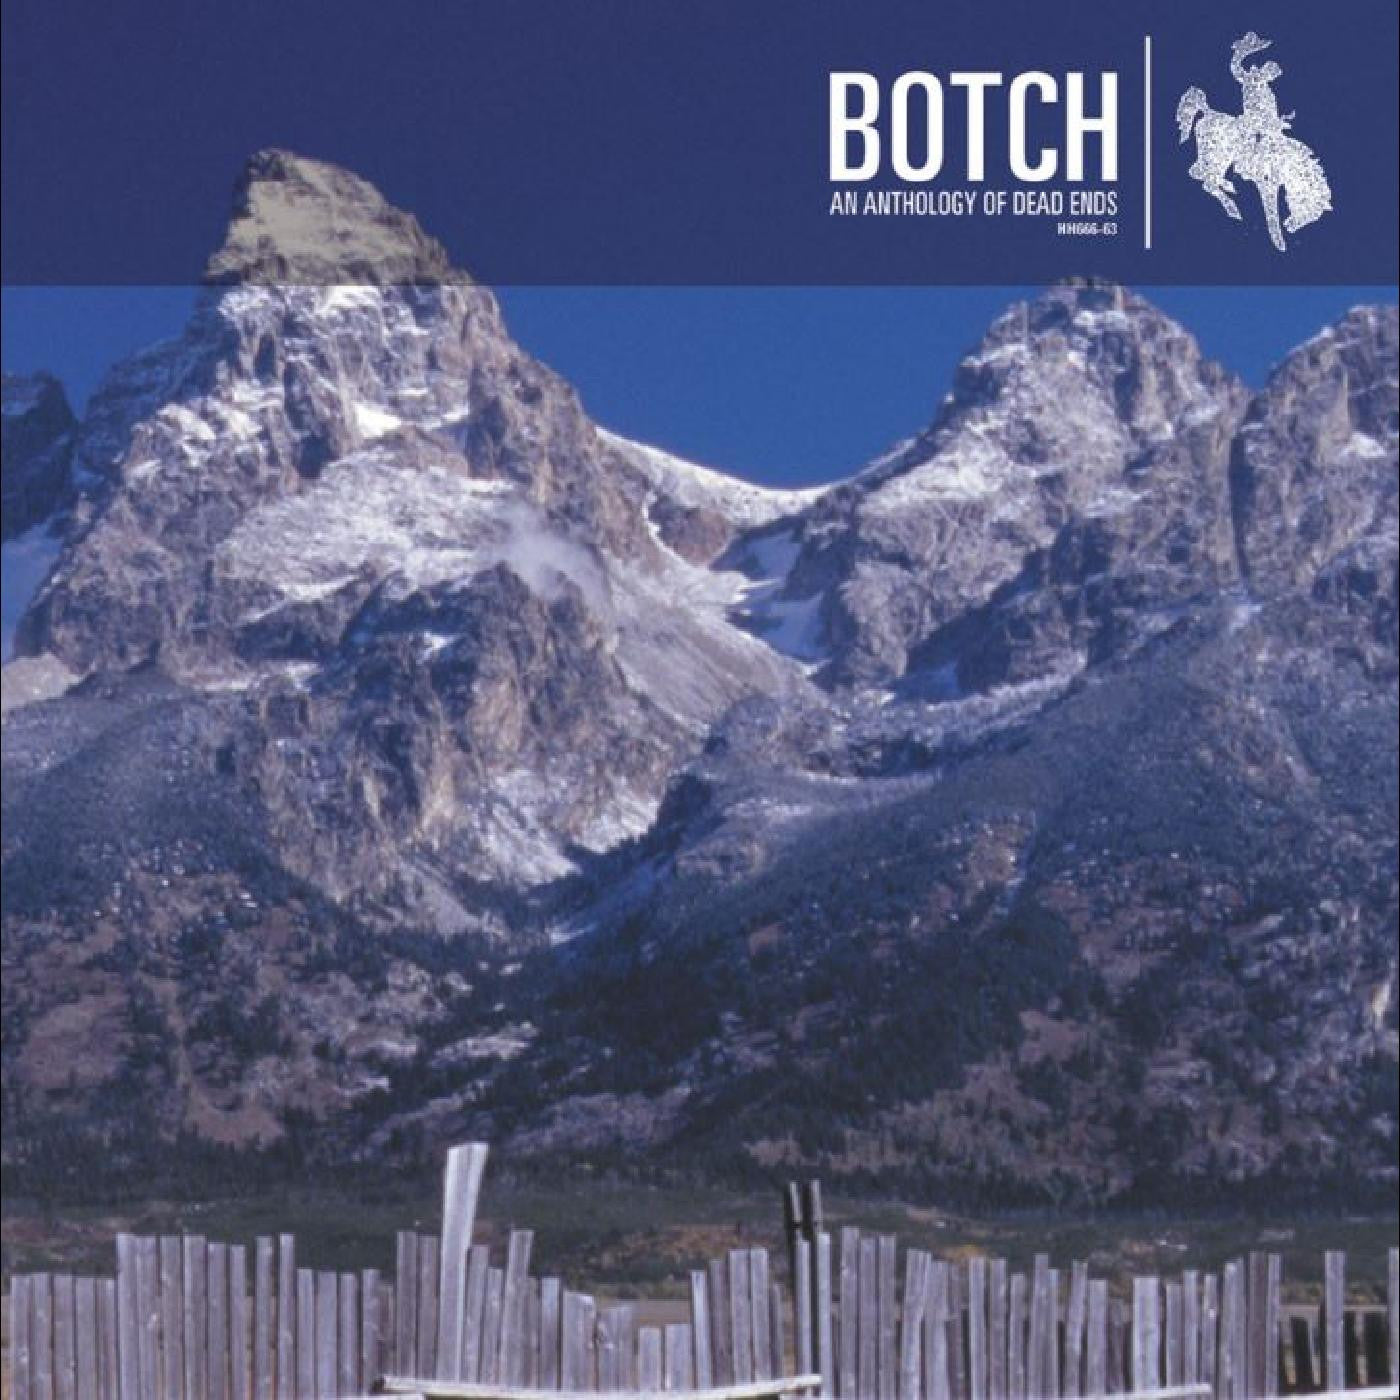 Botch - An Anthology of Dead Ends (Clear Vinyl EP)